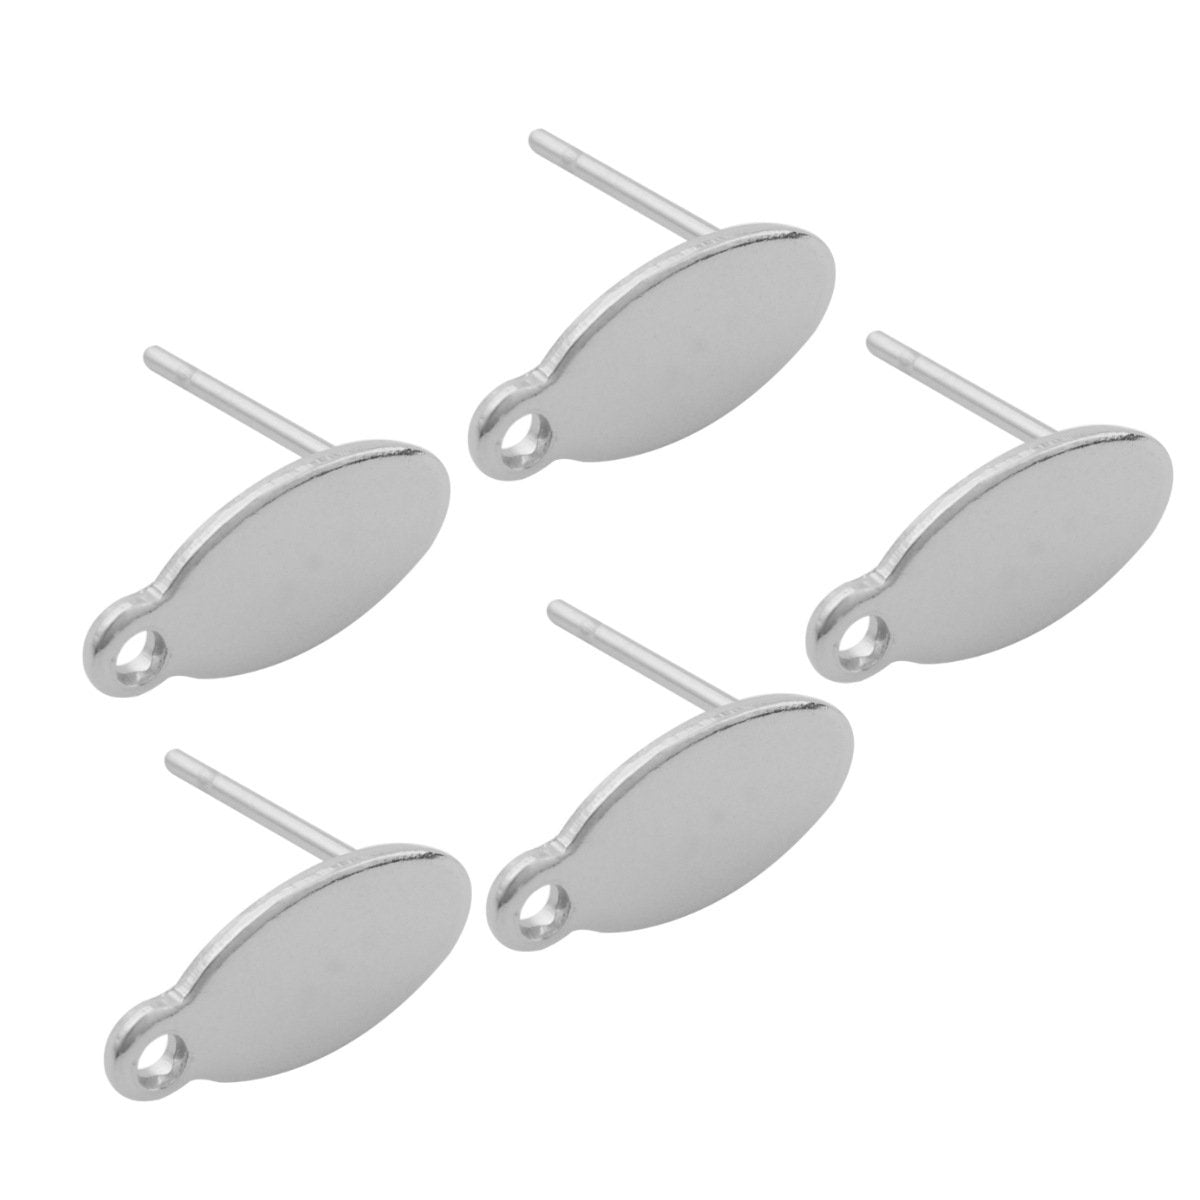 Stainless steel oval earring posts with hole